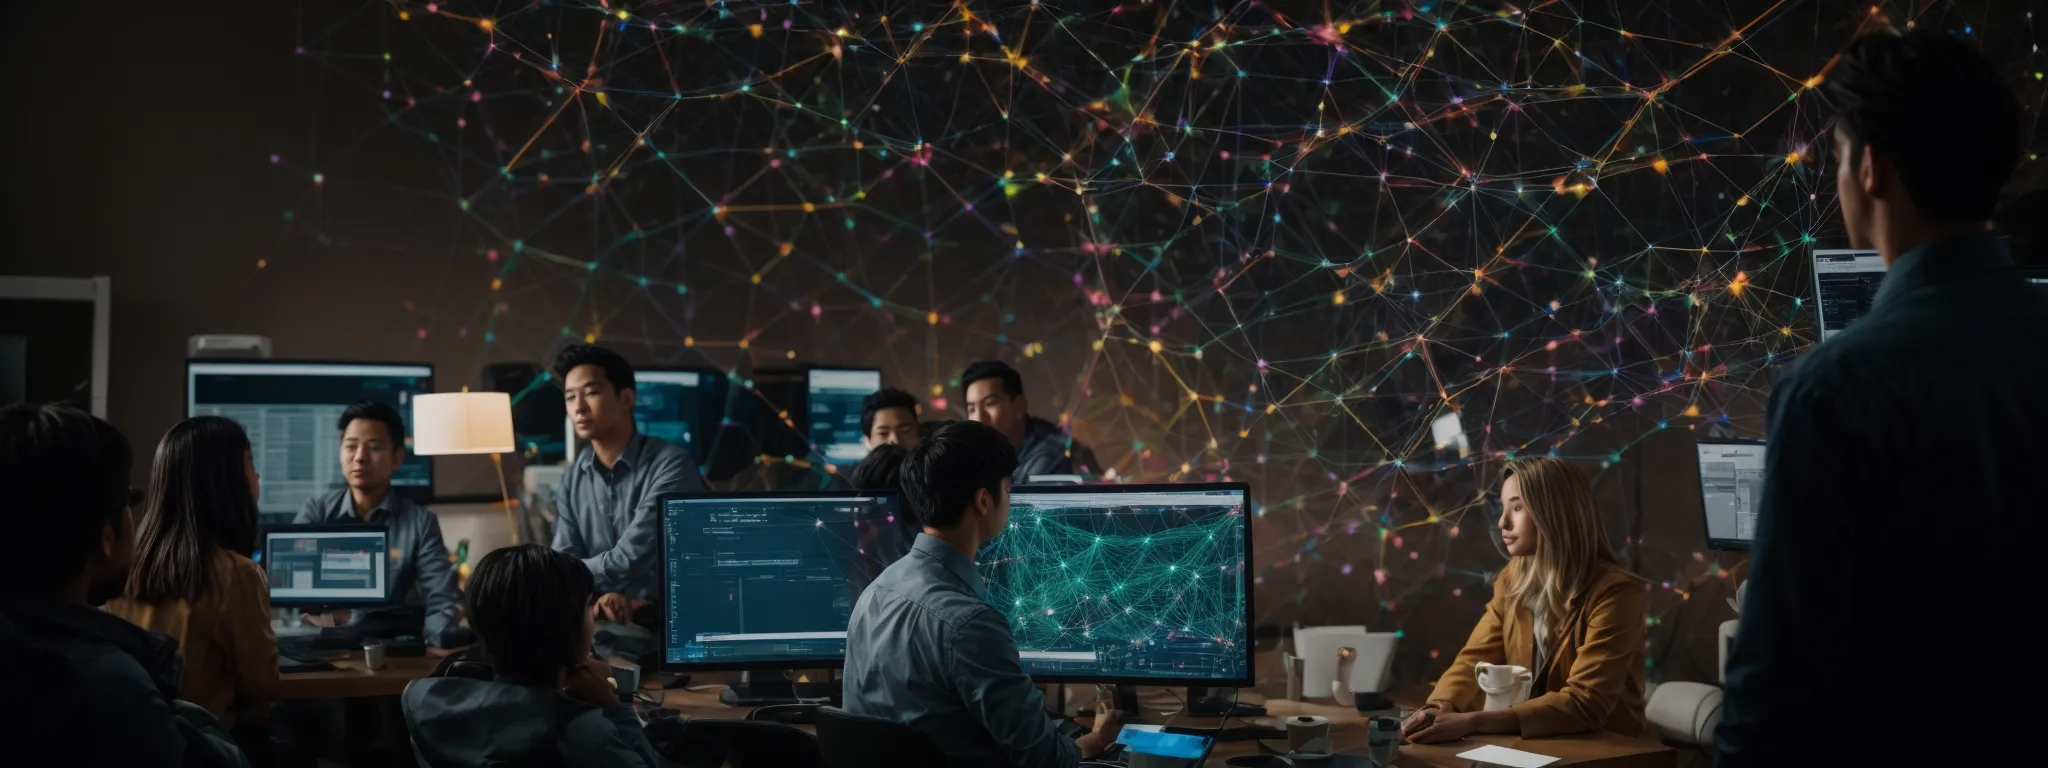 a group of professionals gathered around a computer monitor, analyzing a colorful web of interconnected nodes representing a website's structure.